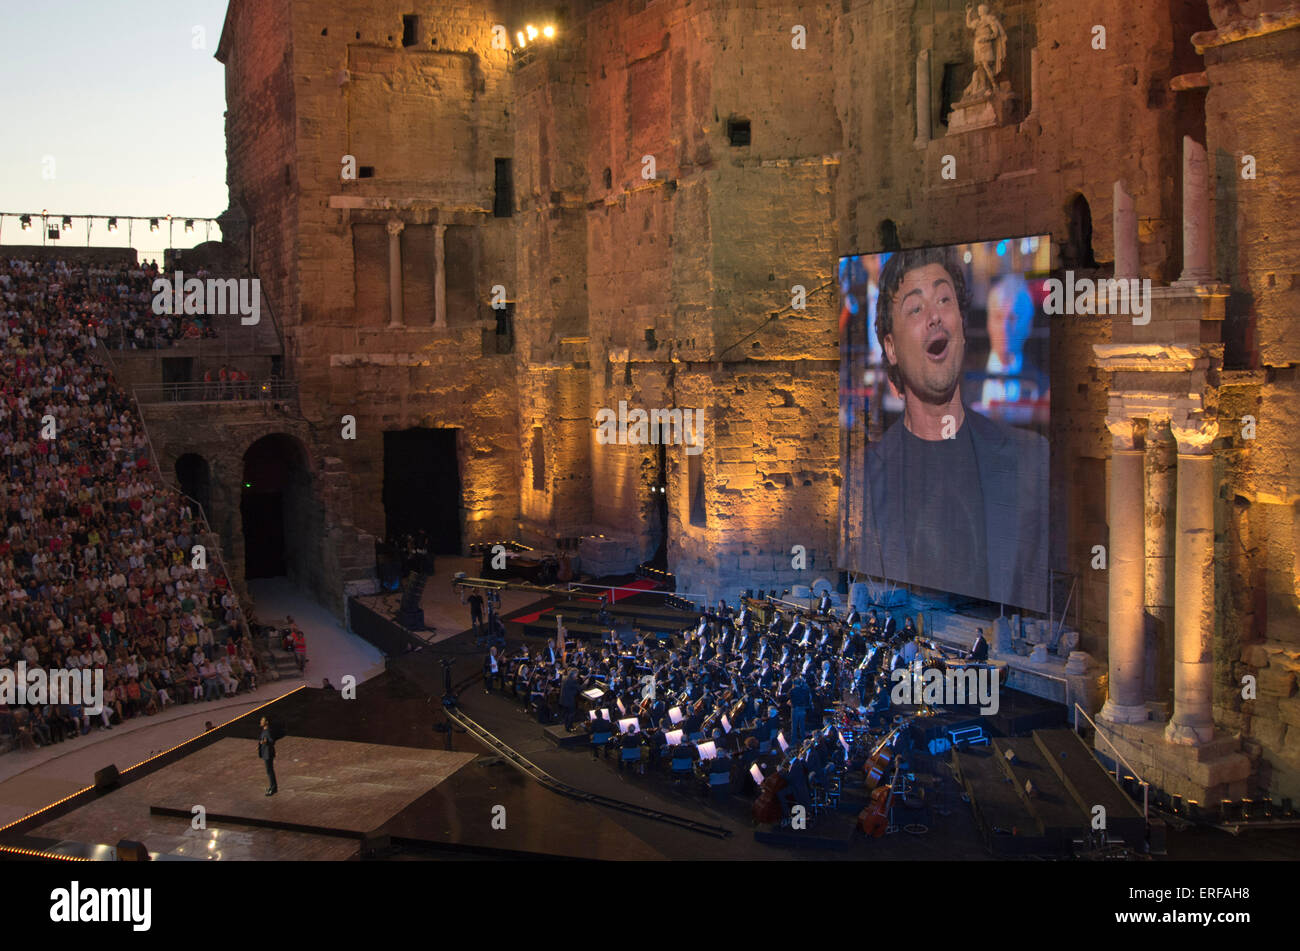 Evening concert on the occasion of National Music Day 2013 in the Roman Theatre of Orange, in France. The singer on the screen Stock Photo